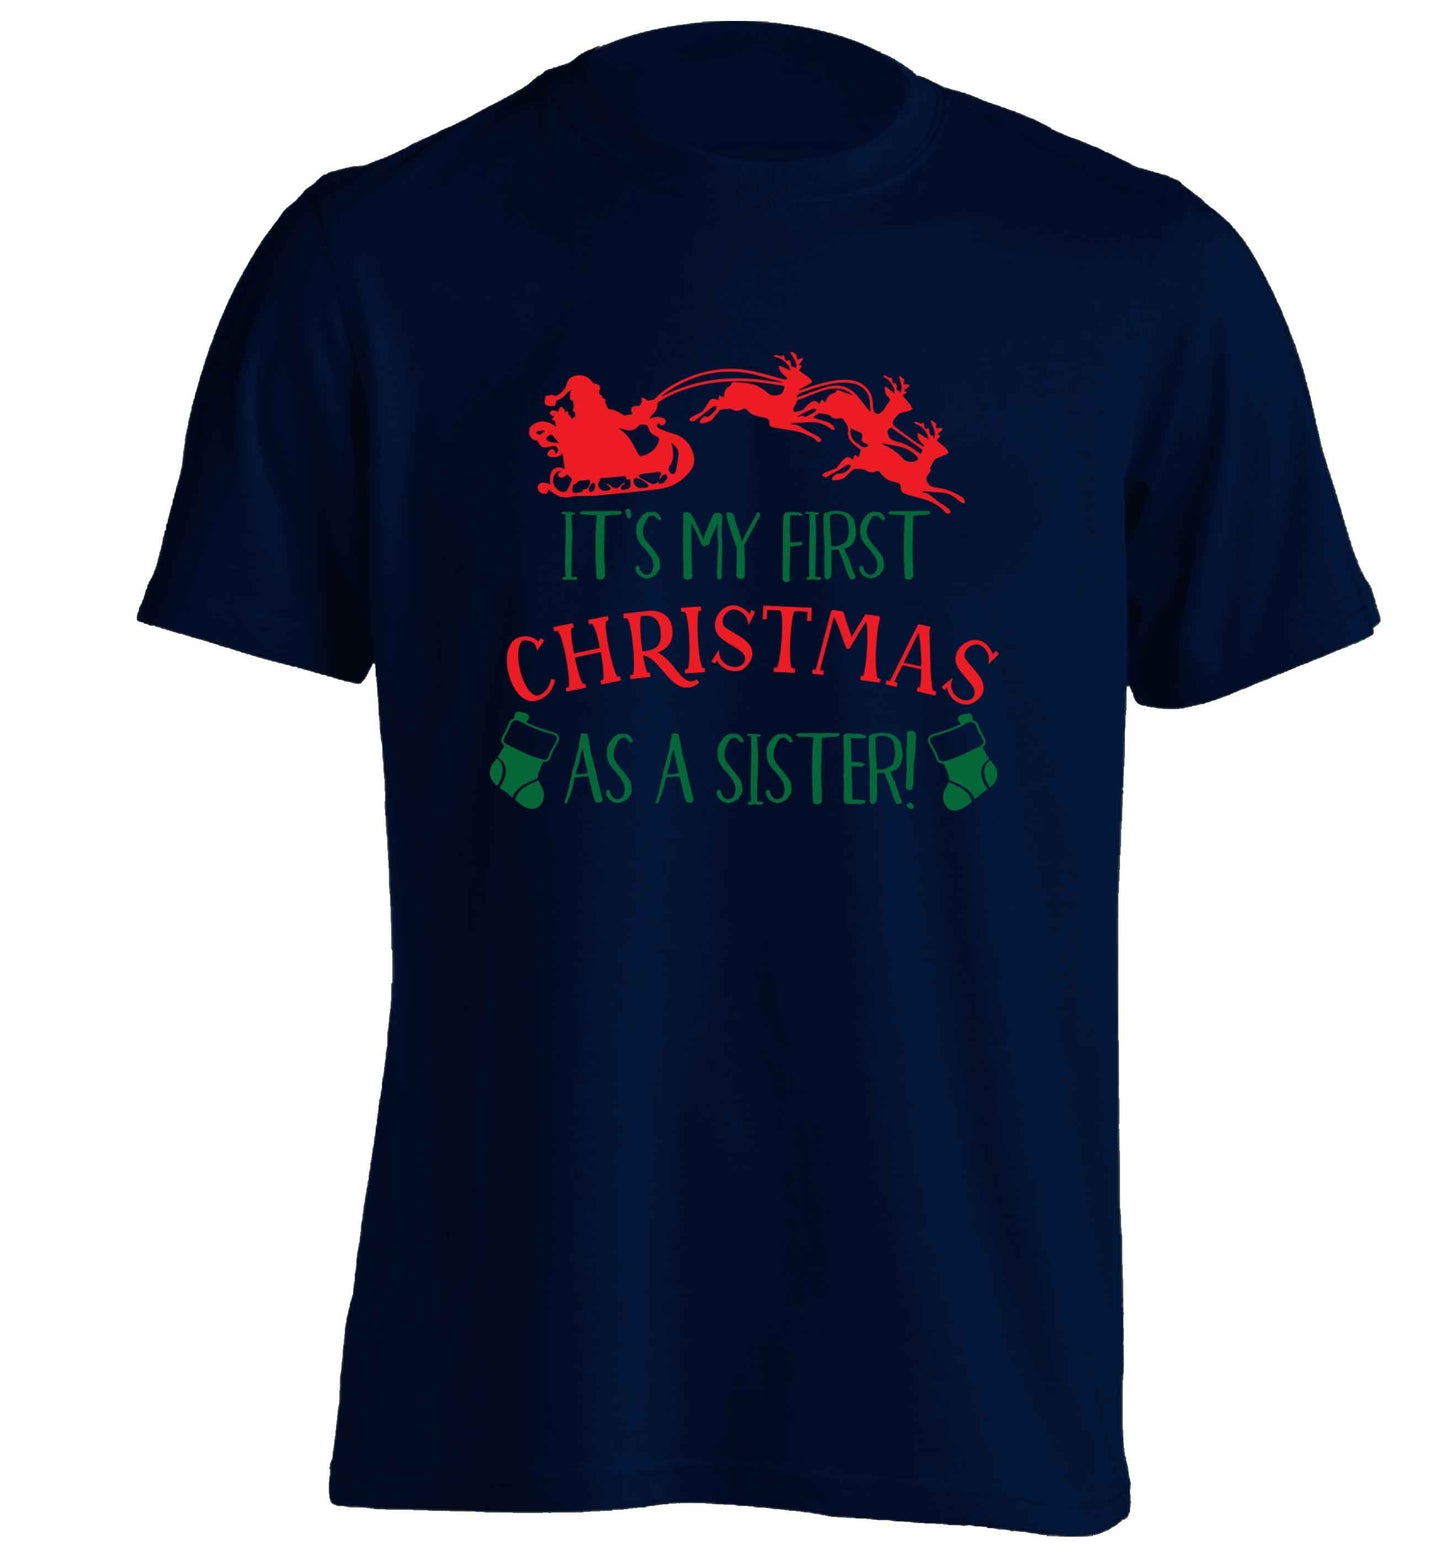 It's my first Christmas as a sister! adults unisex navy Tshirt 2XL